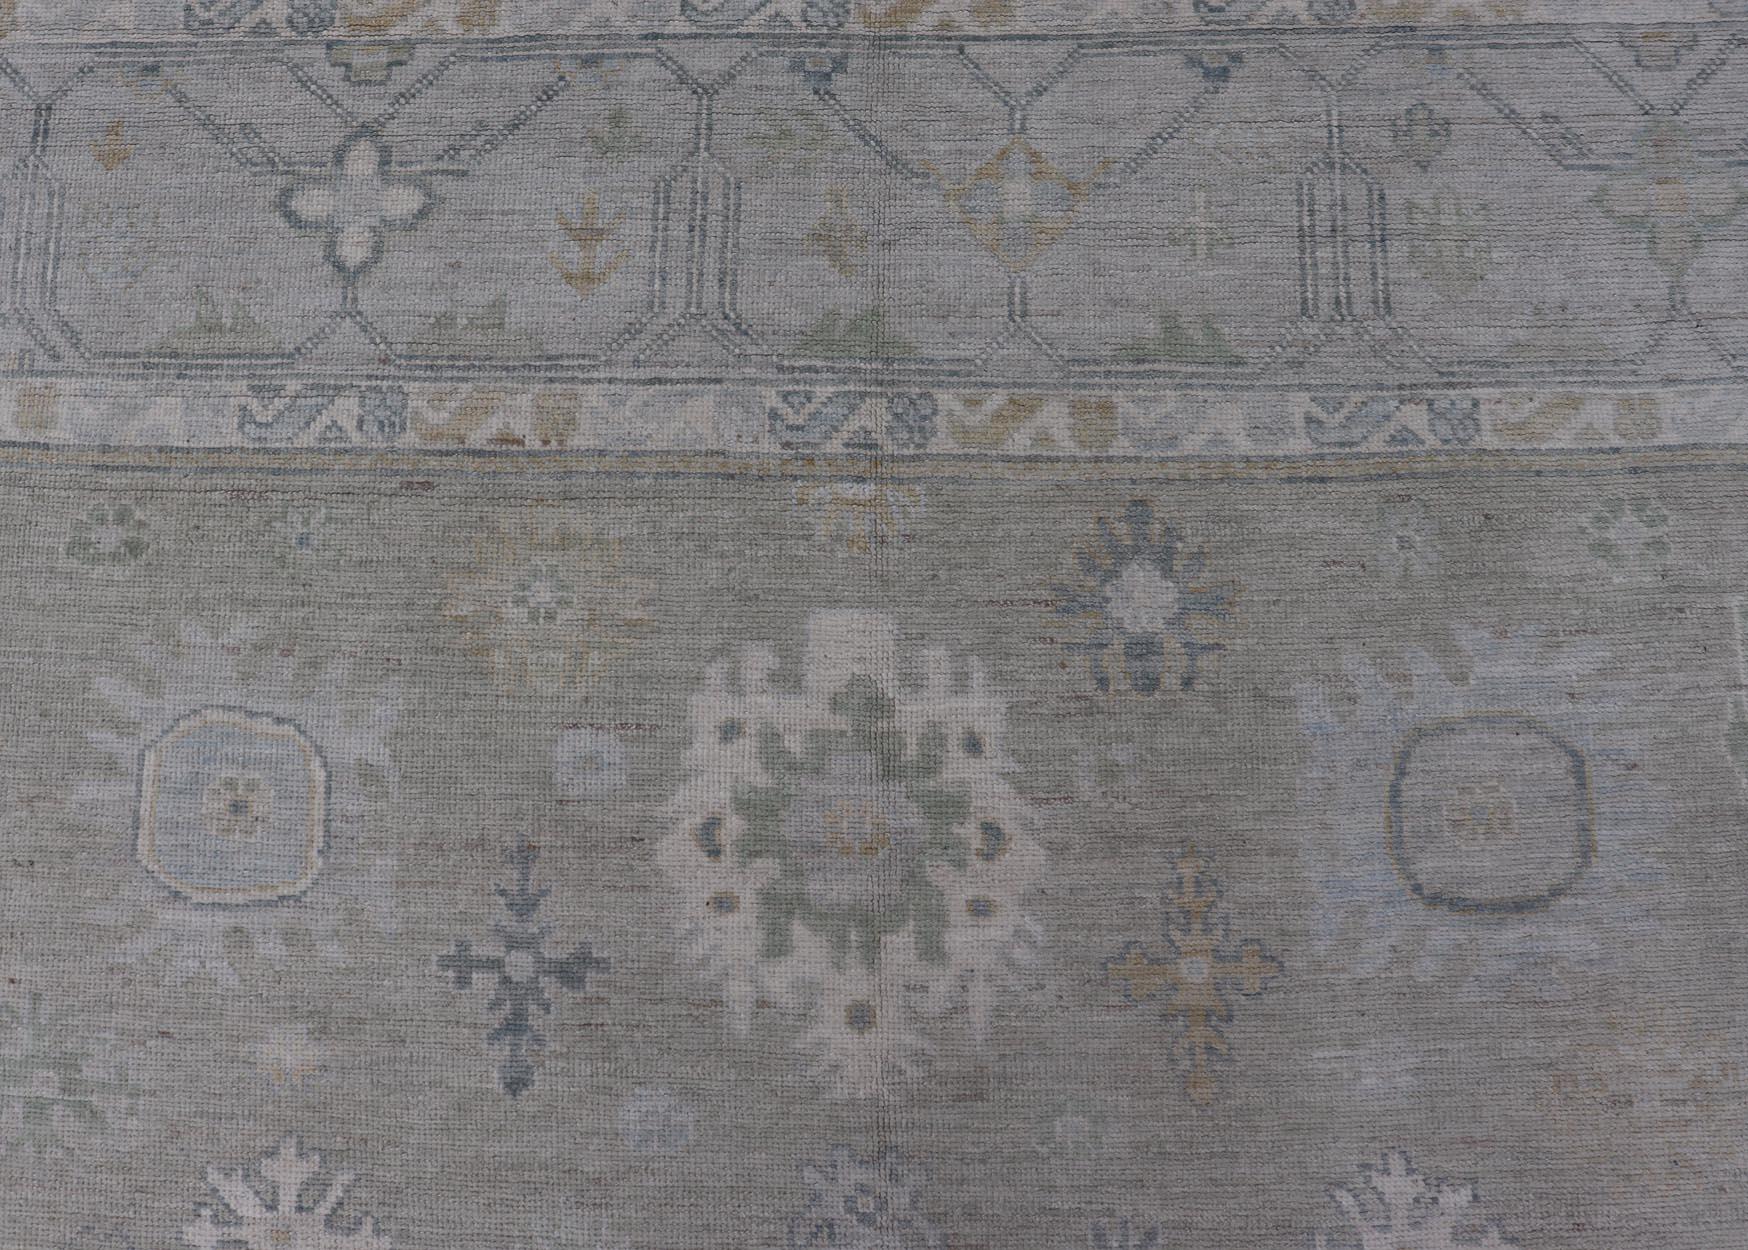 Hand-Knotted Transitional Neutral Oushak Rug in Light Gray, Light Blue, Green For Sale 2